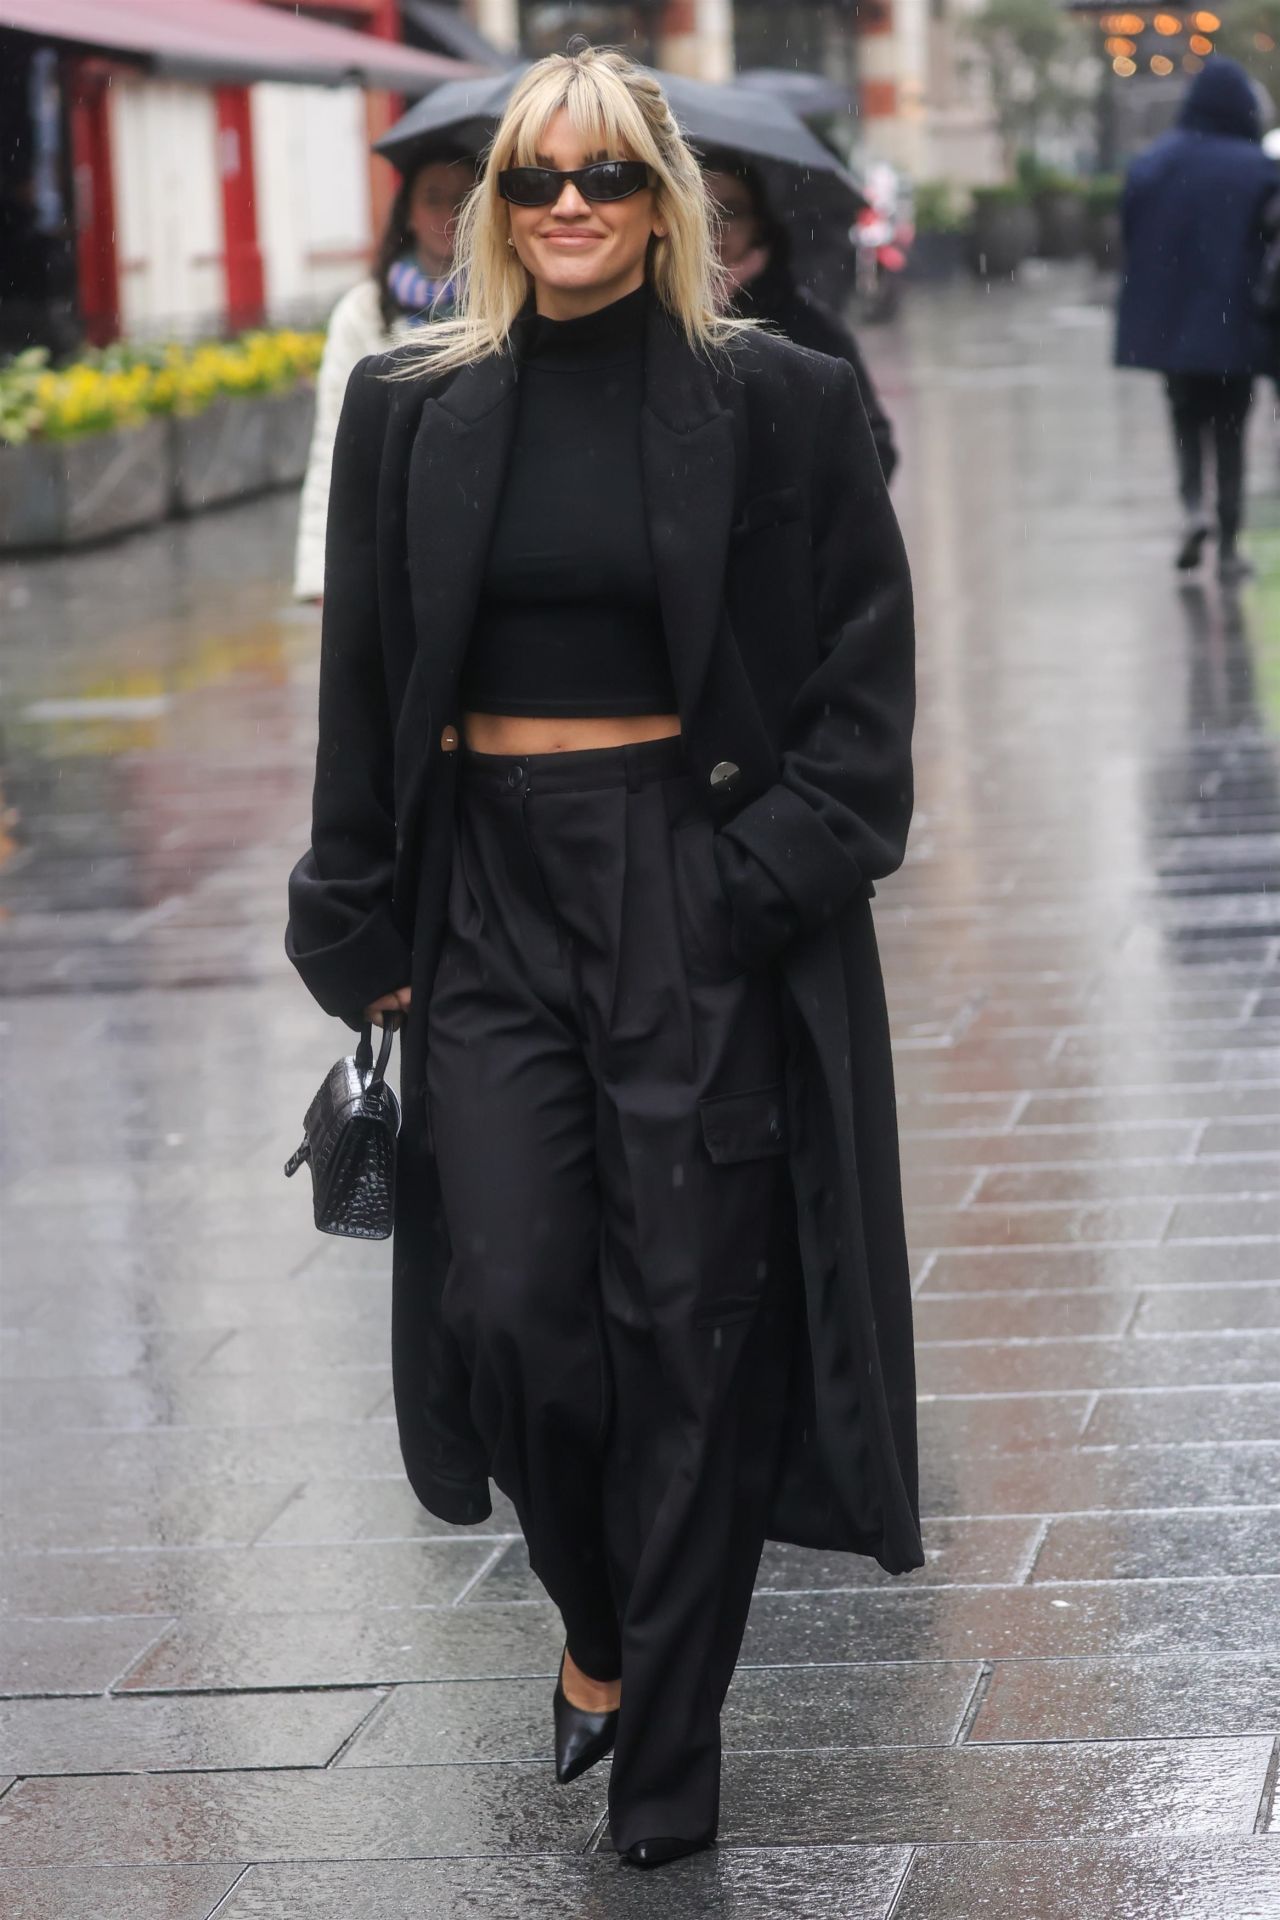 Ashley Roberts in a Black Crop Top and Trousers in London 02/22/2023 ...